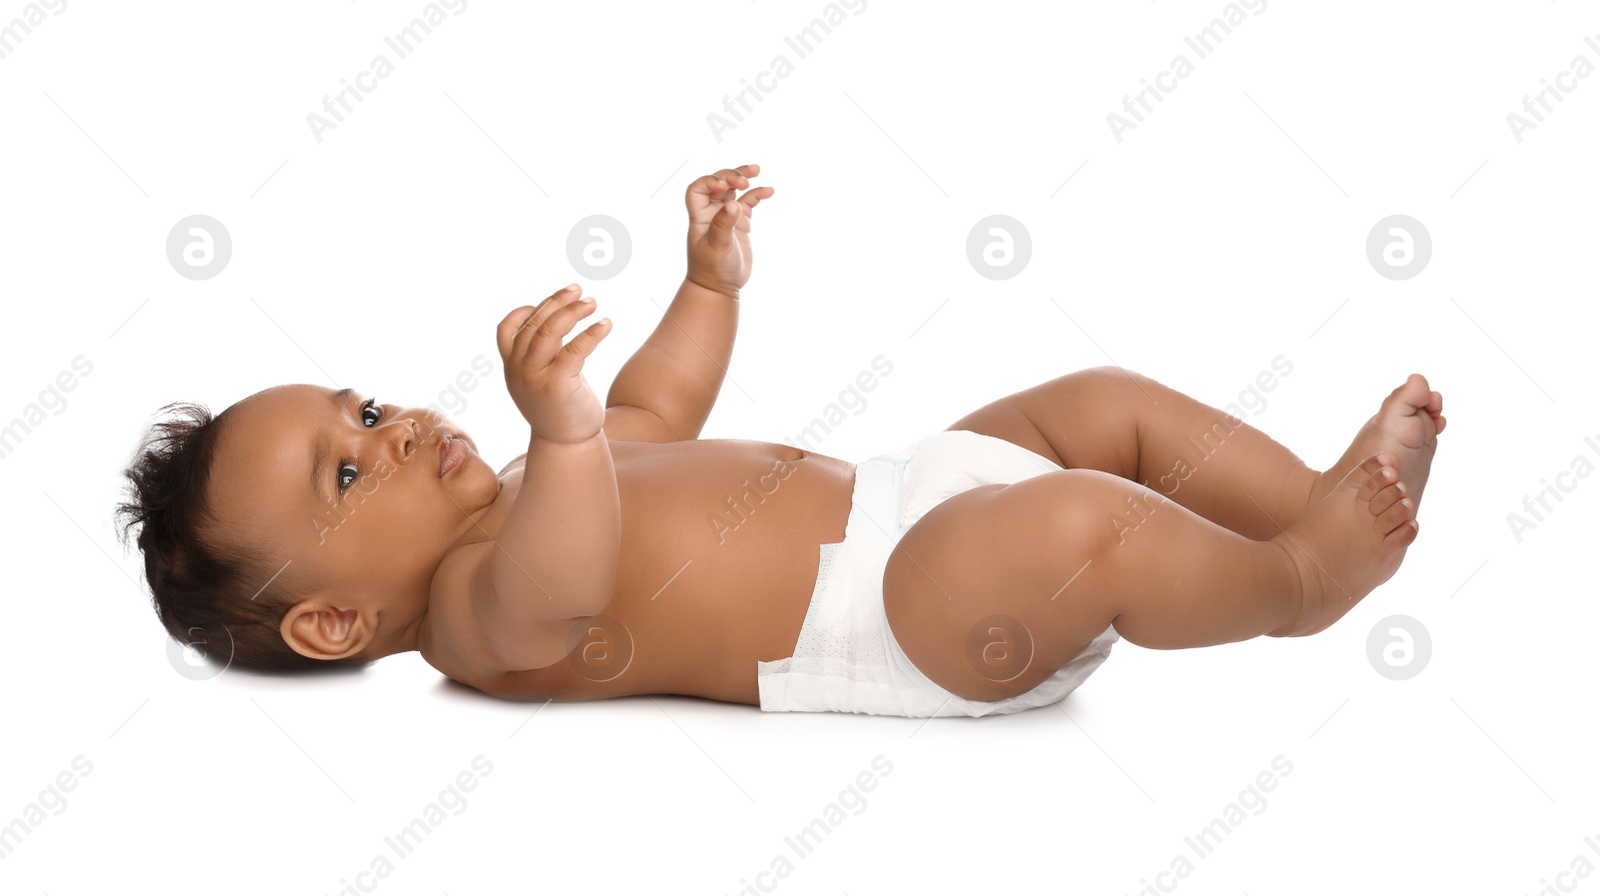 Photo of Adorable African-American baby in diaper on white background